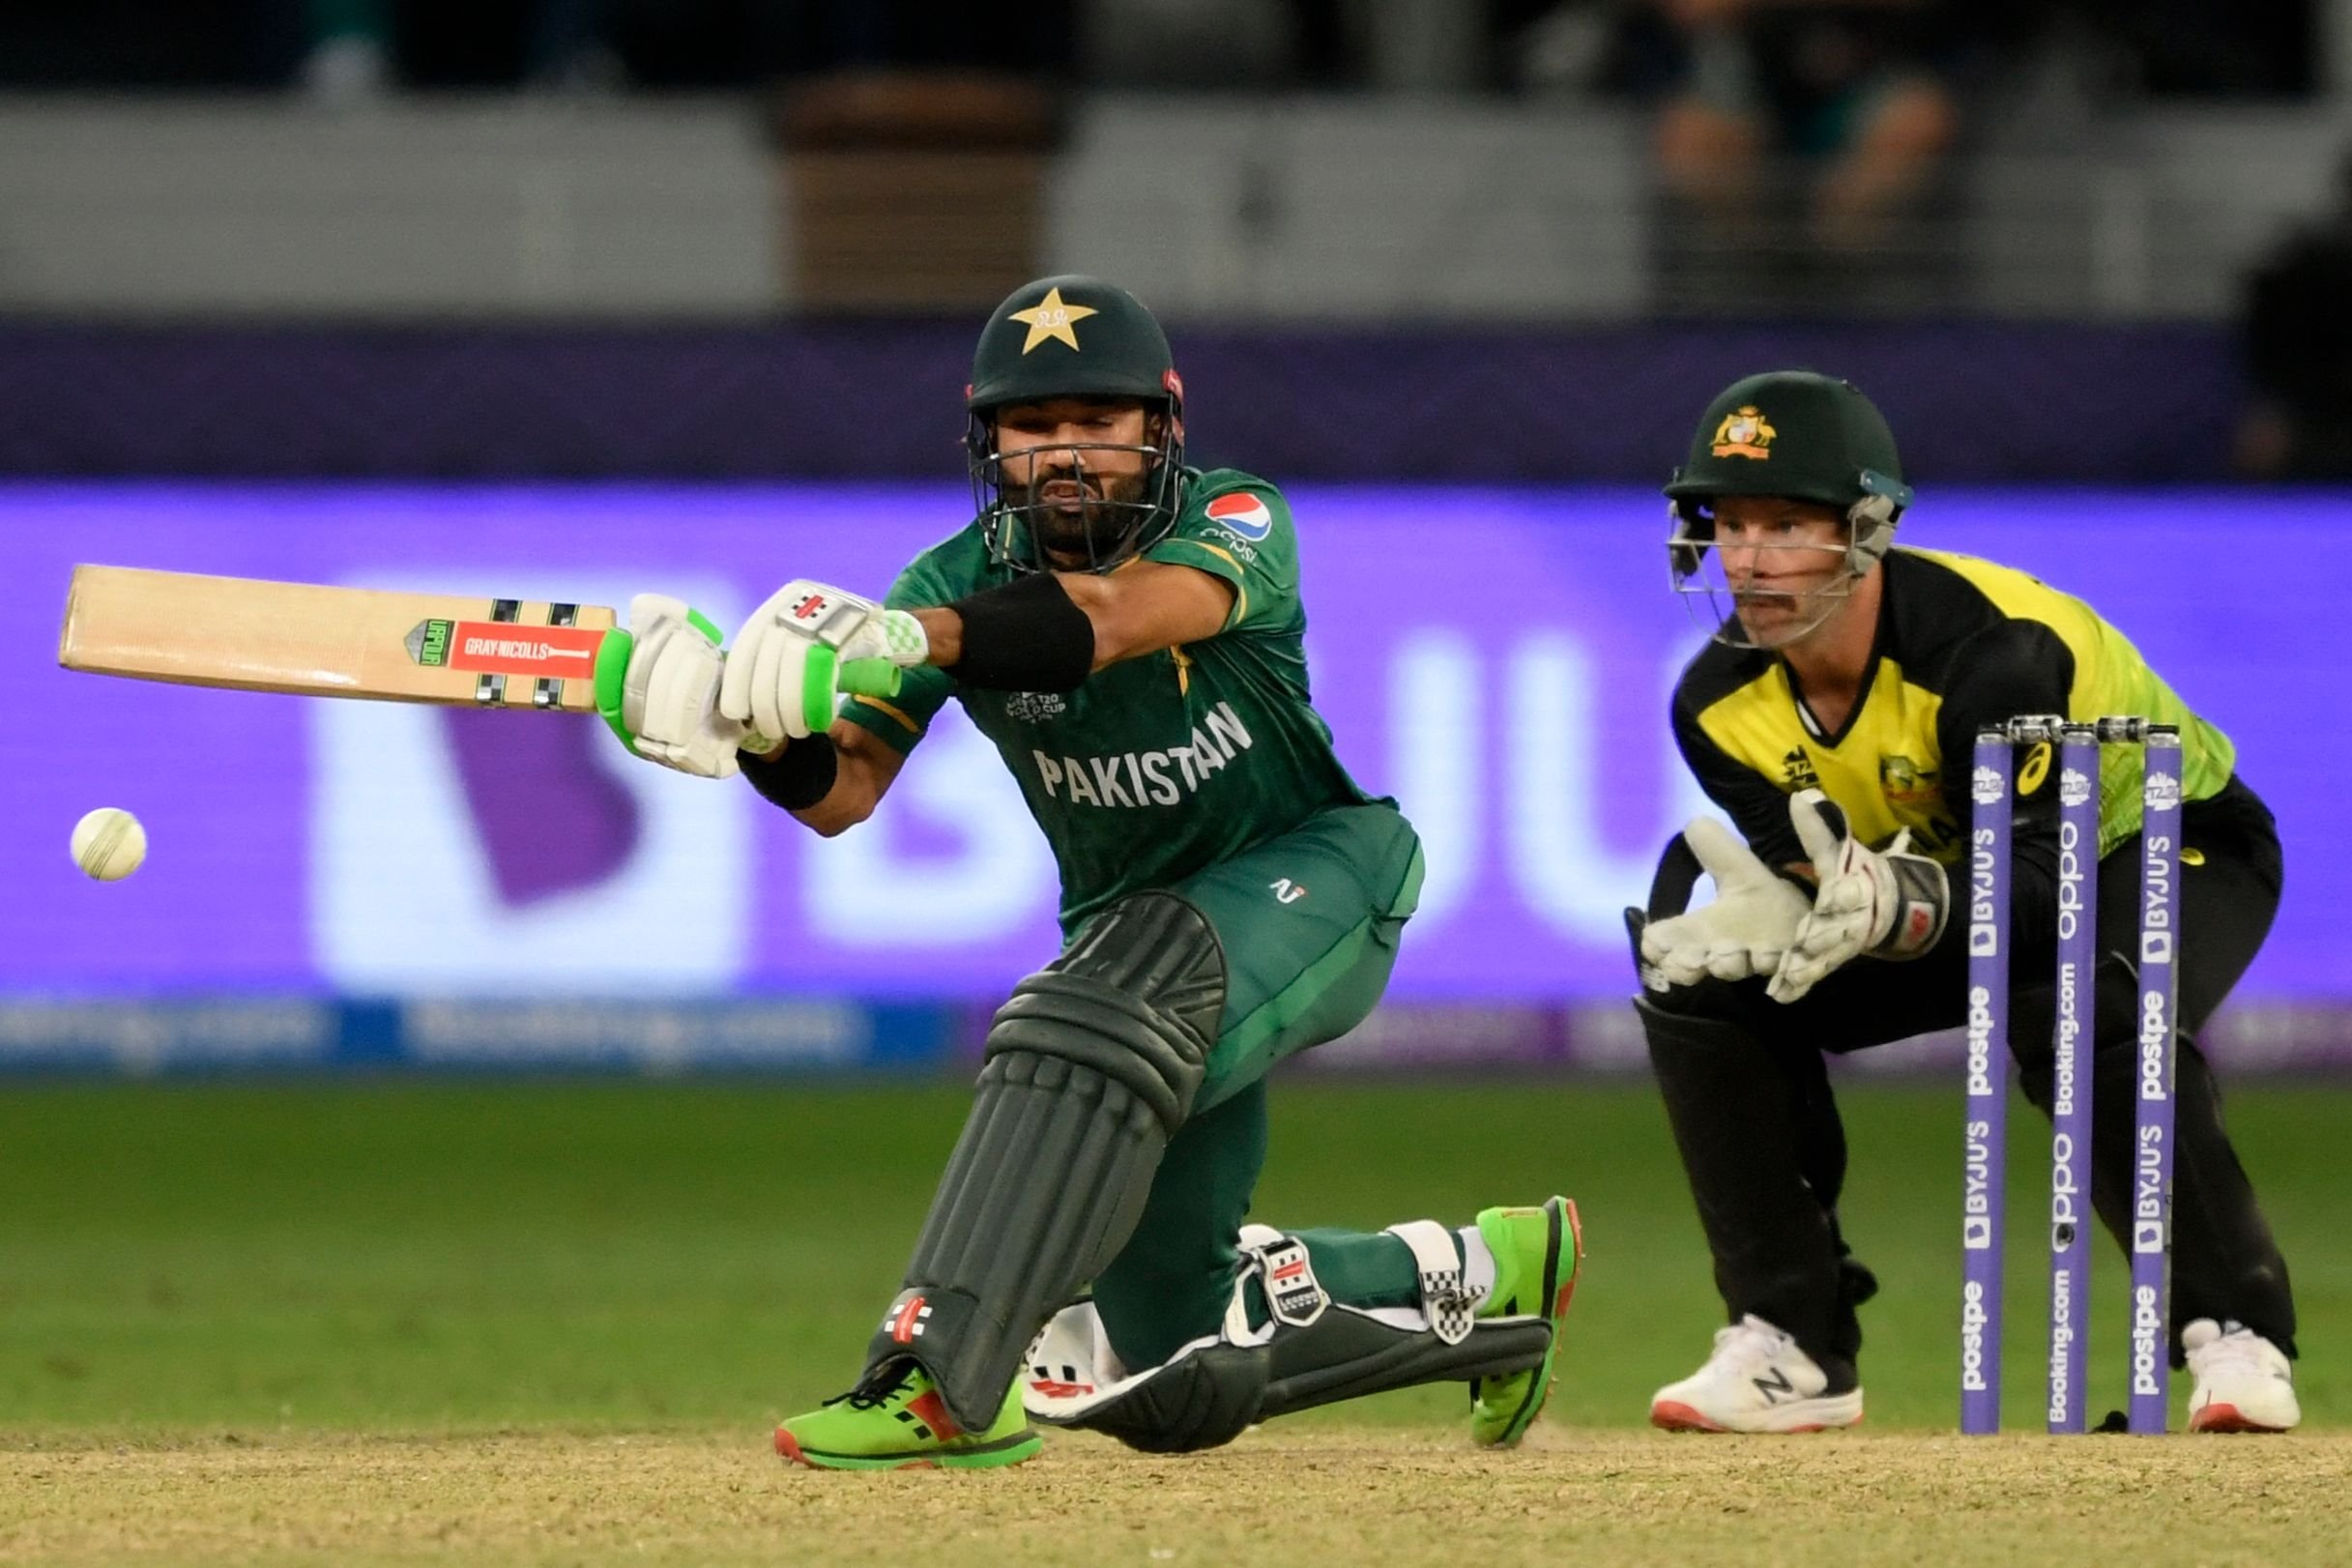 Pakistan's Mohammad Rizwan (L) plays a shot as Australia's wicketkeeper Matthew Wade watches during the ICC men's T20 World Cup semifinal in Dubai, UAE, Nov. 11, 2021. (AFP Photo)